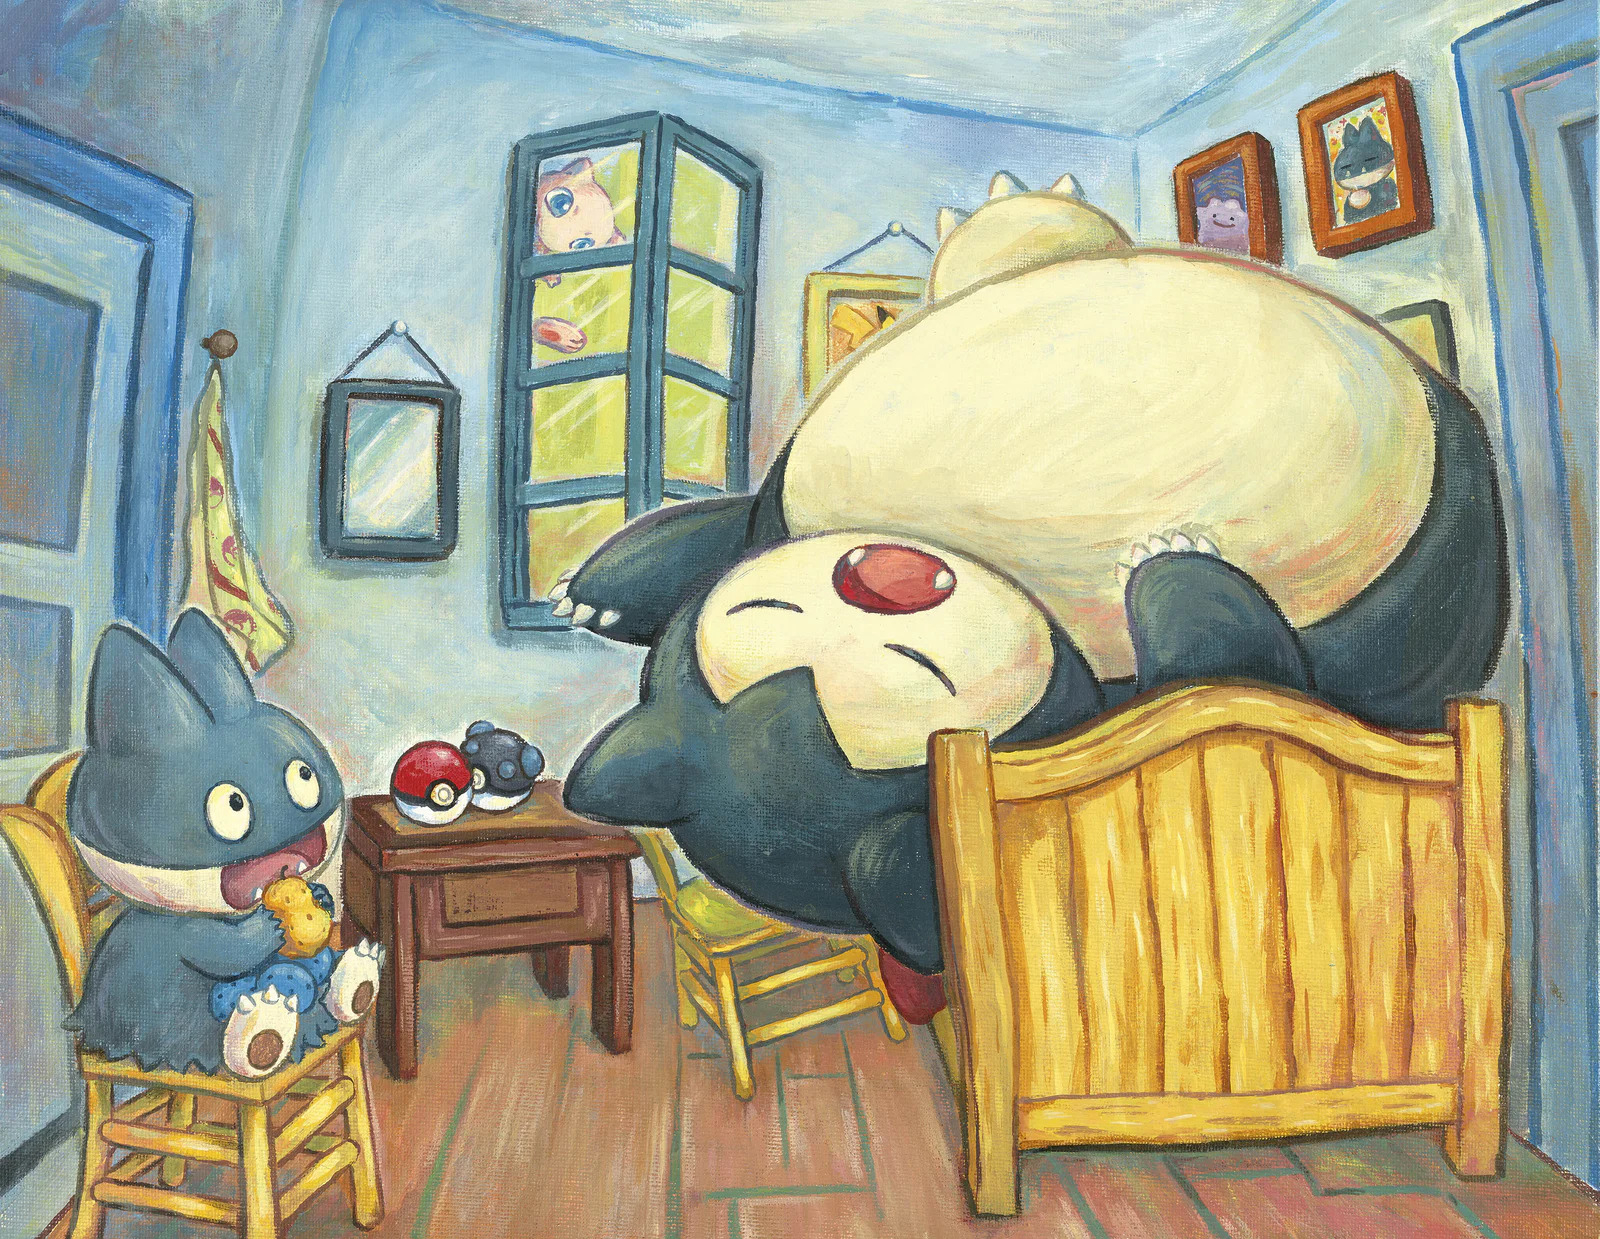 The Bedroom, reimagined with Snorlax and Munchlax